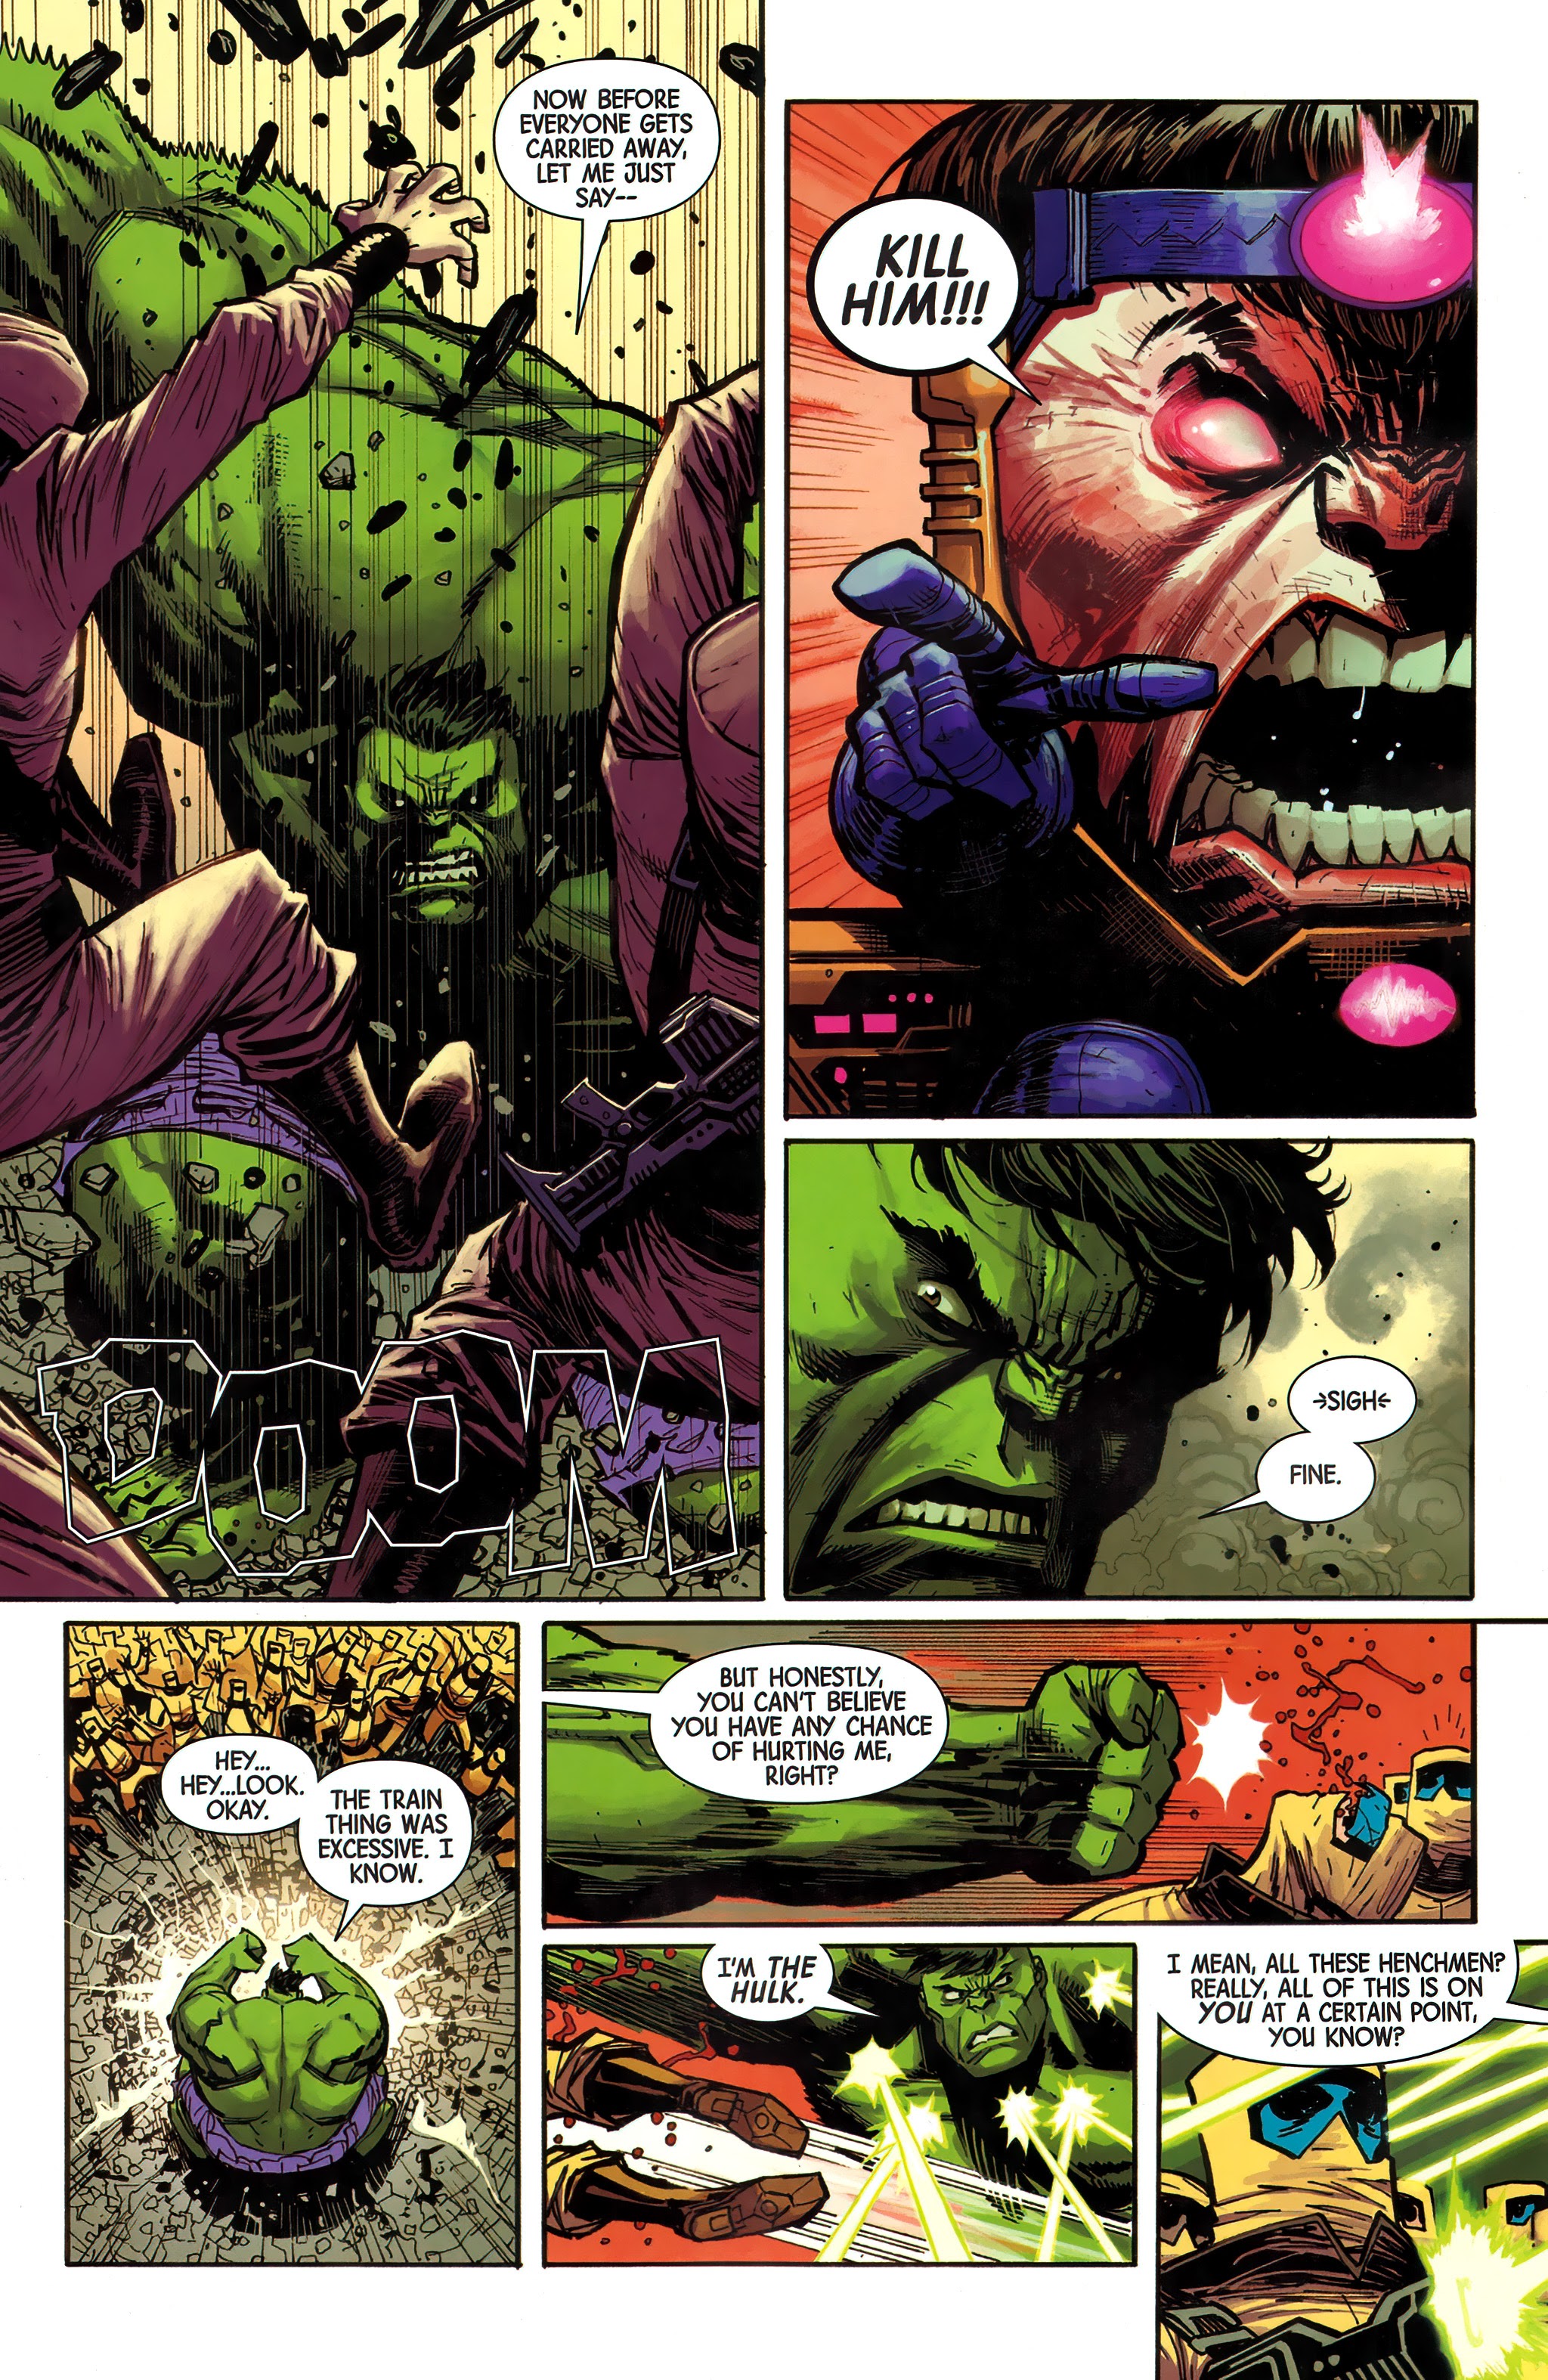 Read online Free Comic Book Day 2021 comic -  Issue # Avengers - Hulk - 14